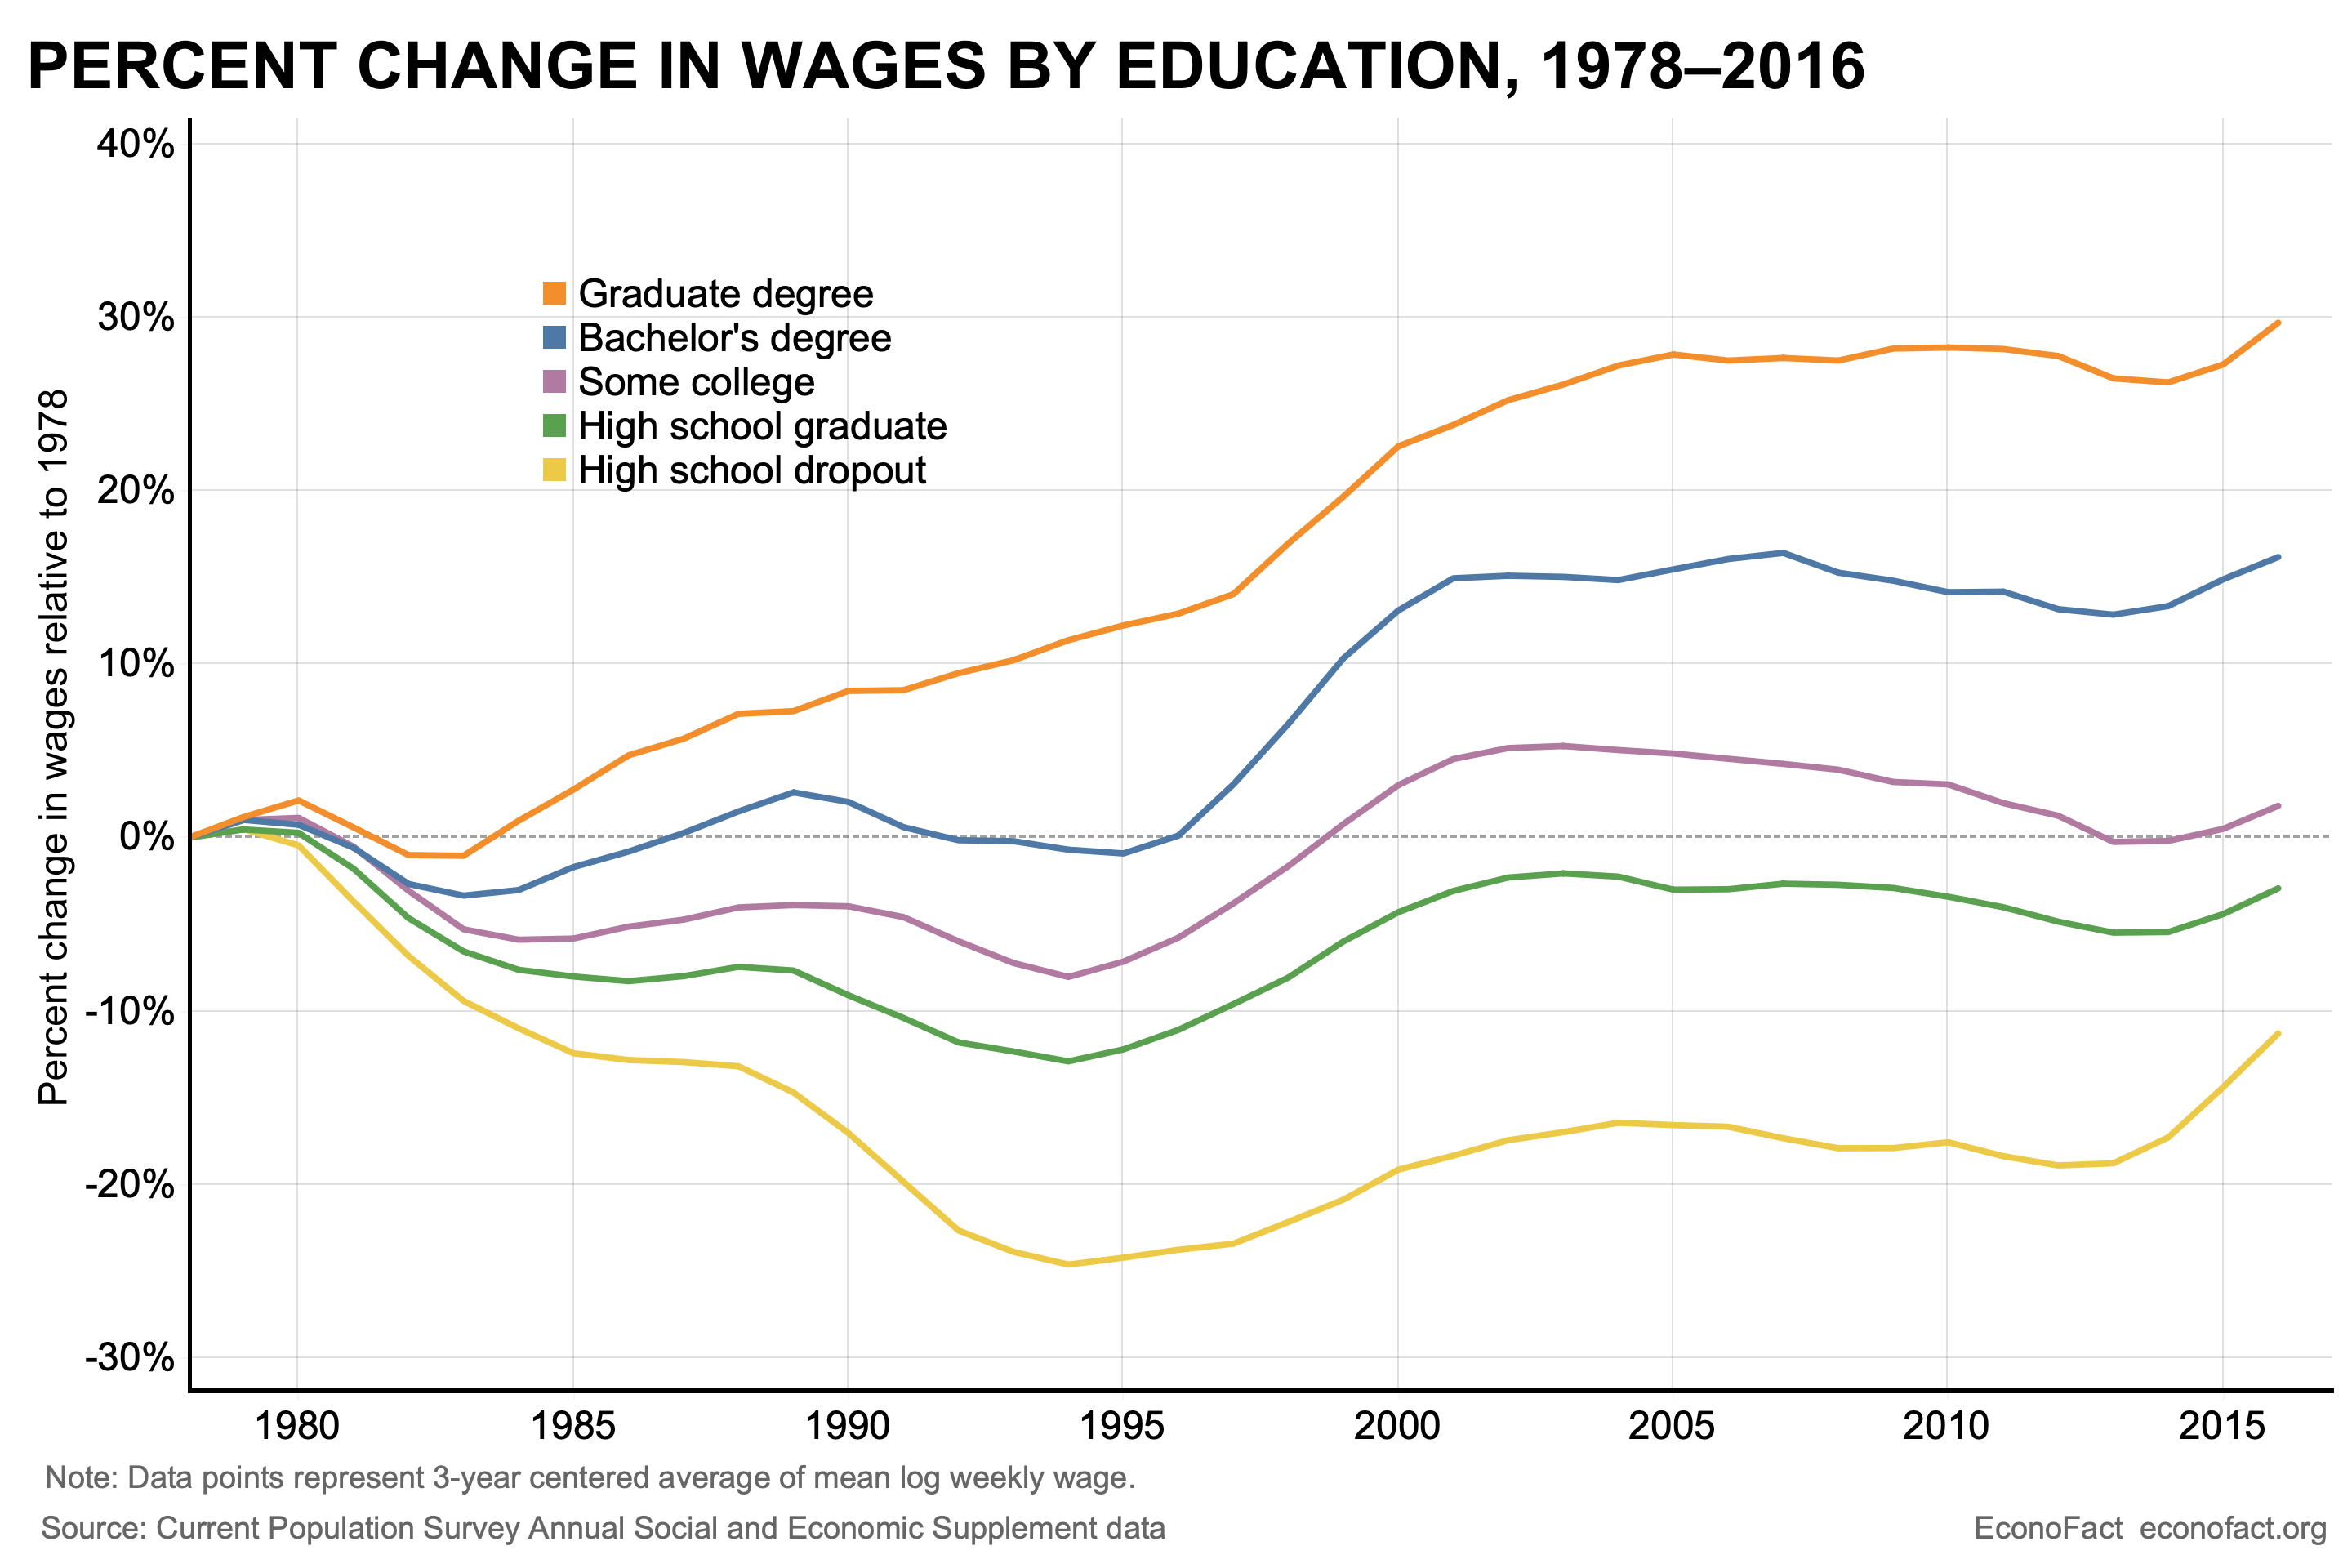 Percent Change in Wages by Education, 1978 to 2016. Adults with a graduate degree see 30% change wage growth in 2016 relative to 1978, those with a Bachelor's degree 15%, and wages decline for those with high school diplomas or less.